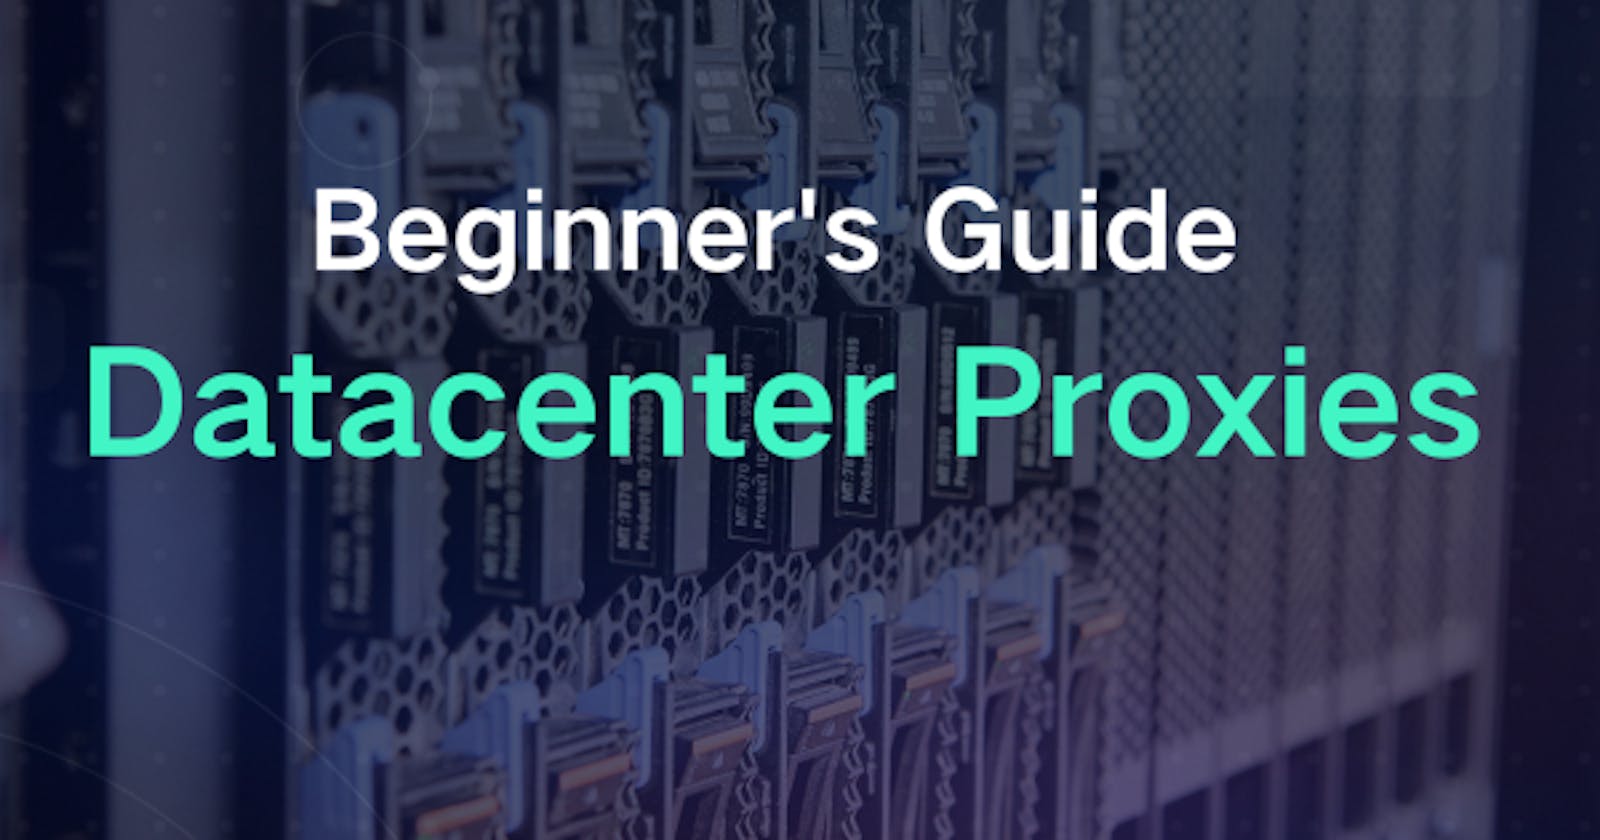 The Beginner's Guide to Proxies: Datacenter Proxies